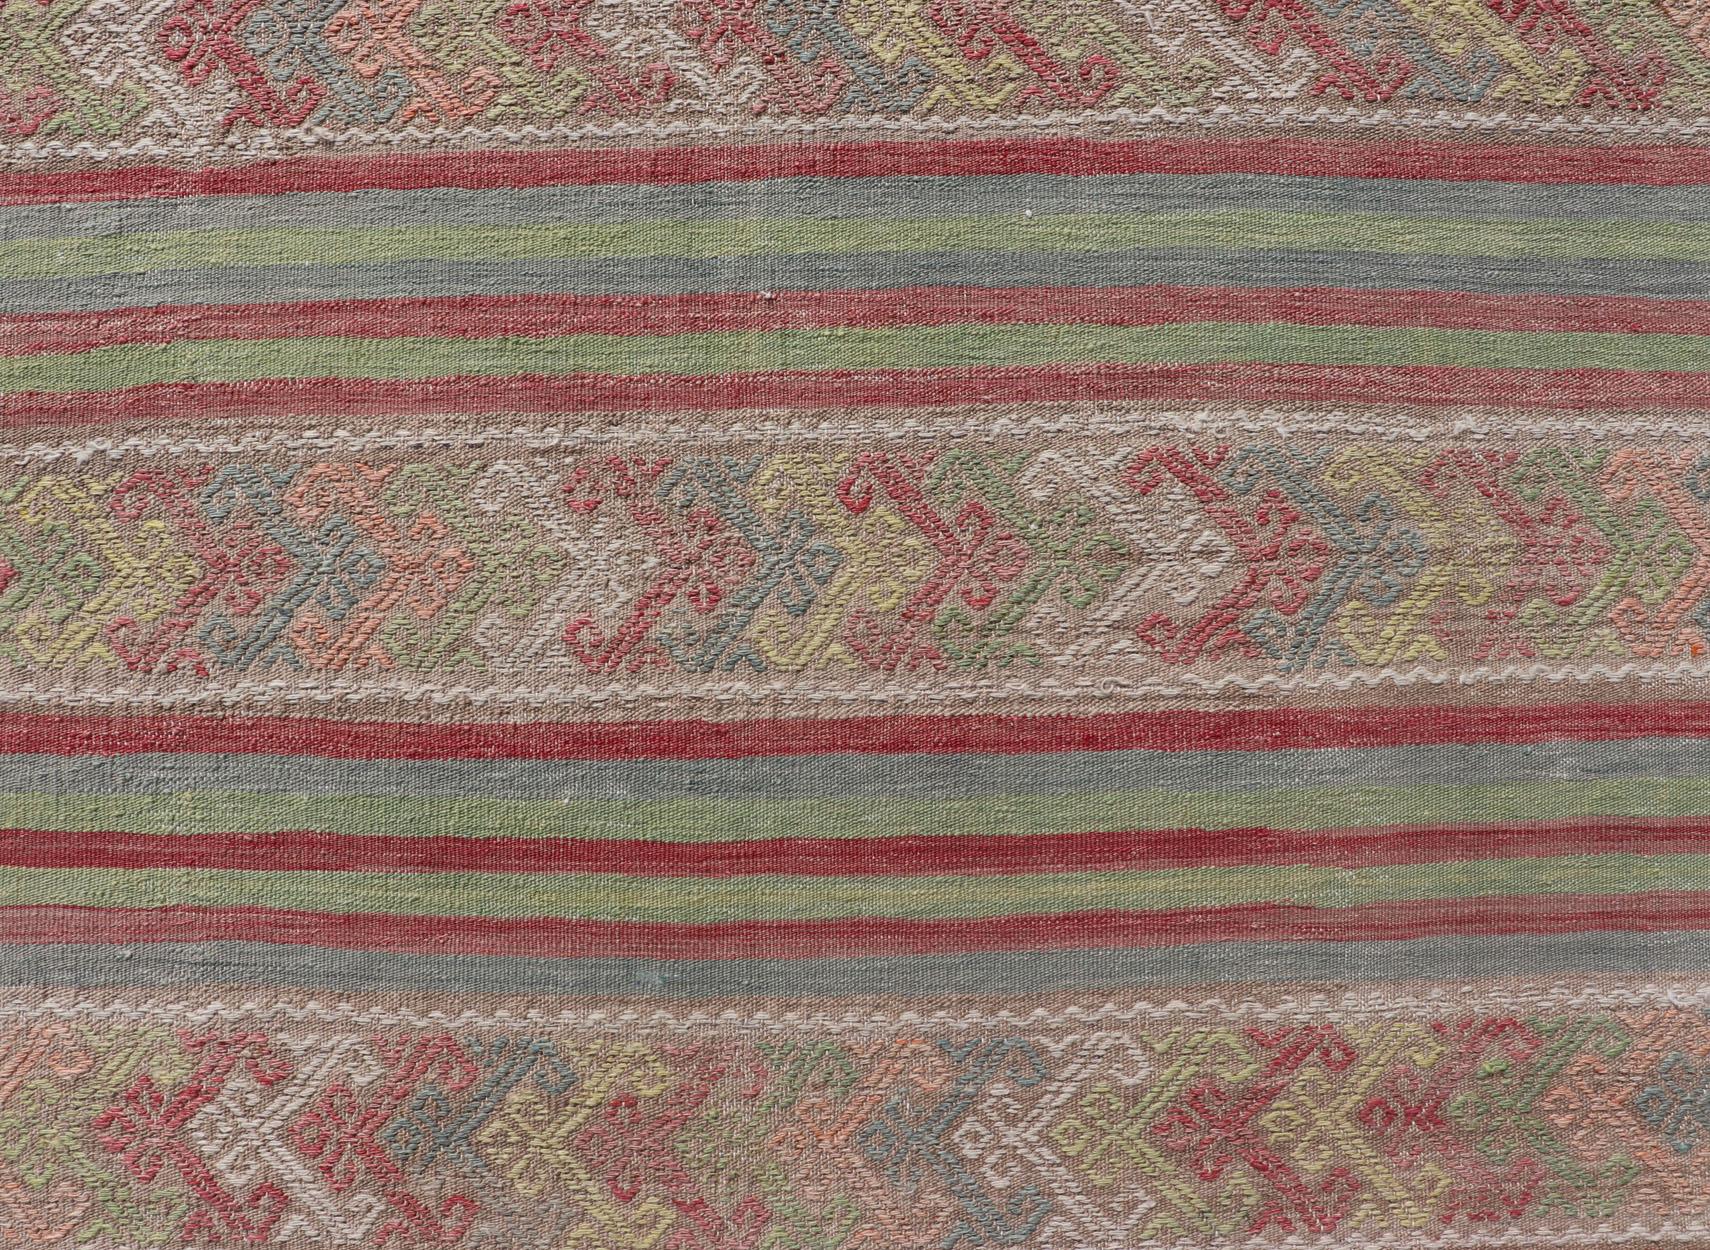 Colorful Vintage Embroidered Kilim with Stripes and Alternating Geometric Motifs For Sale 2